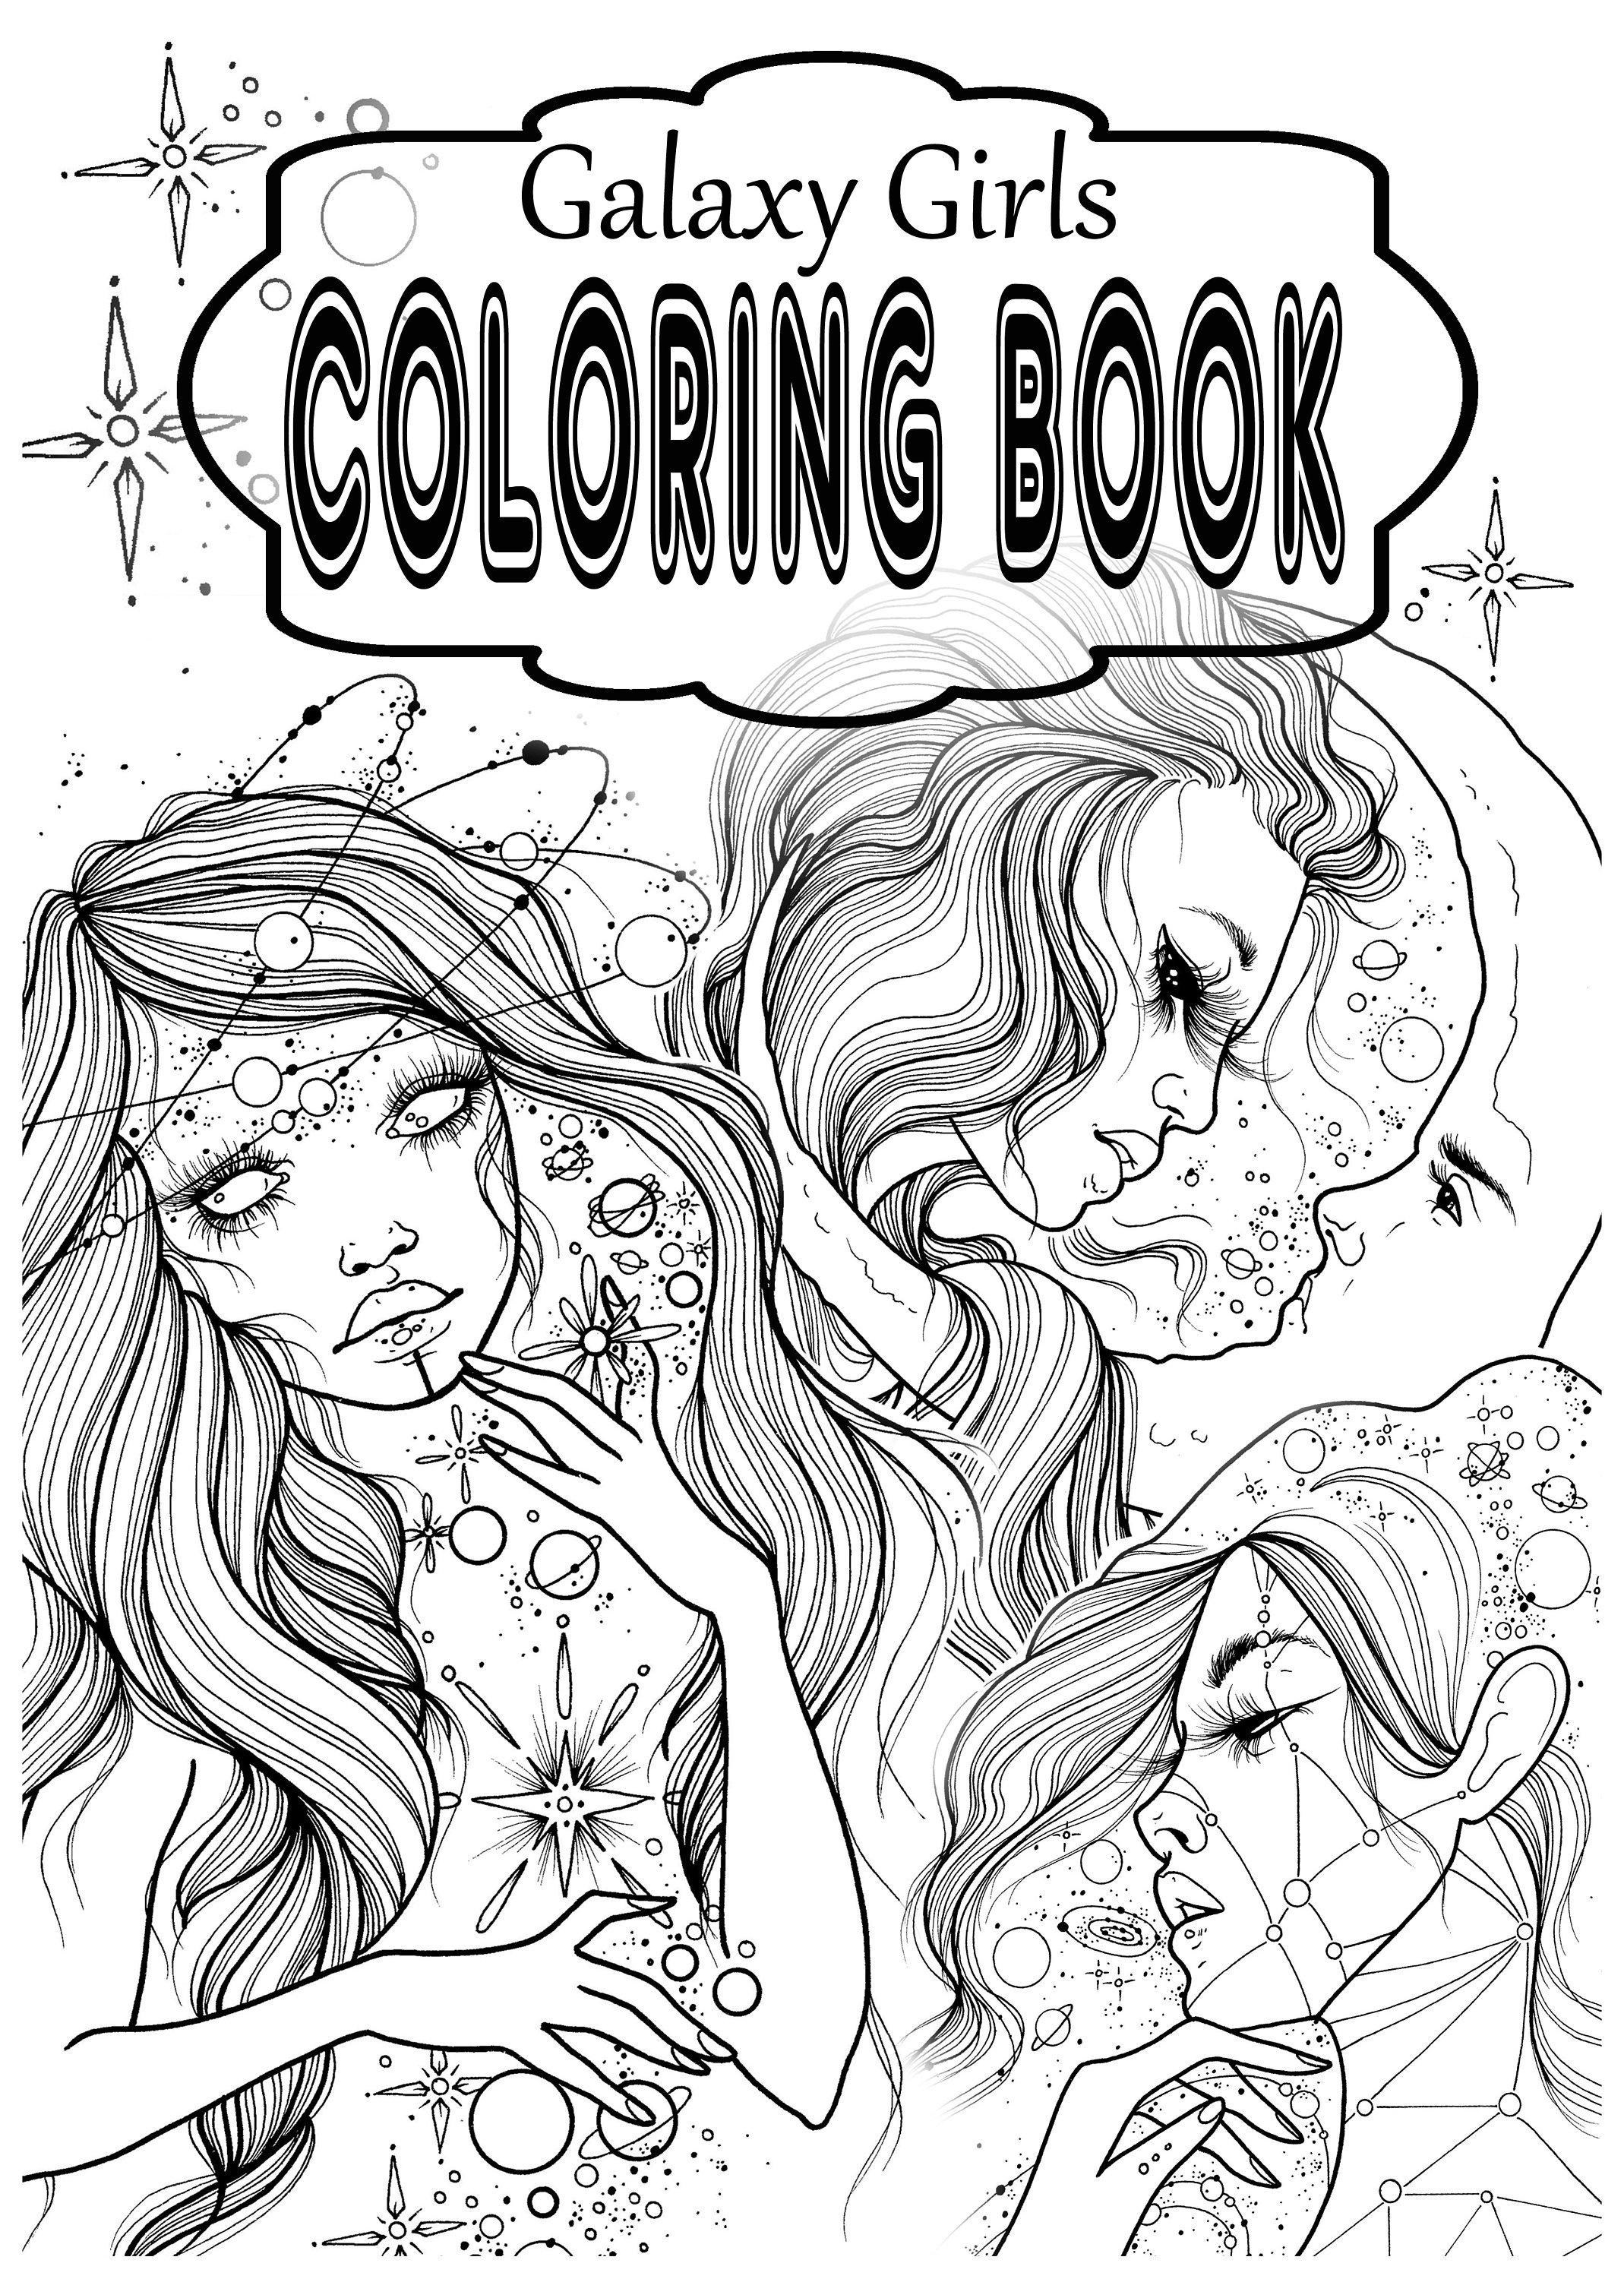 Coloring Book Galaxy Girl for Kids & Adults digital PDF | Etsy